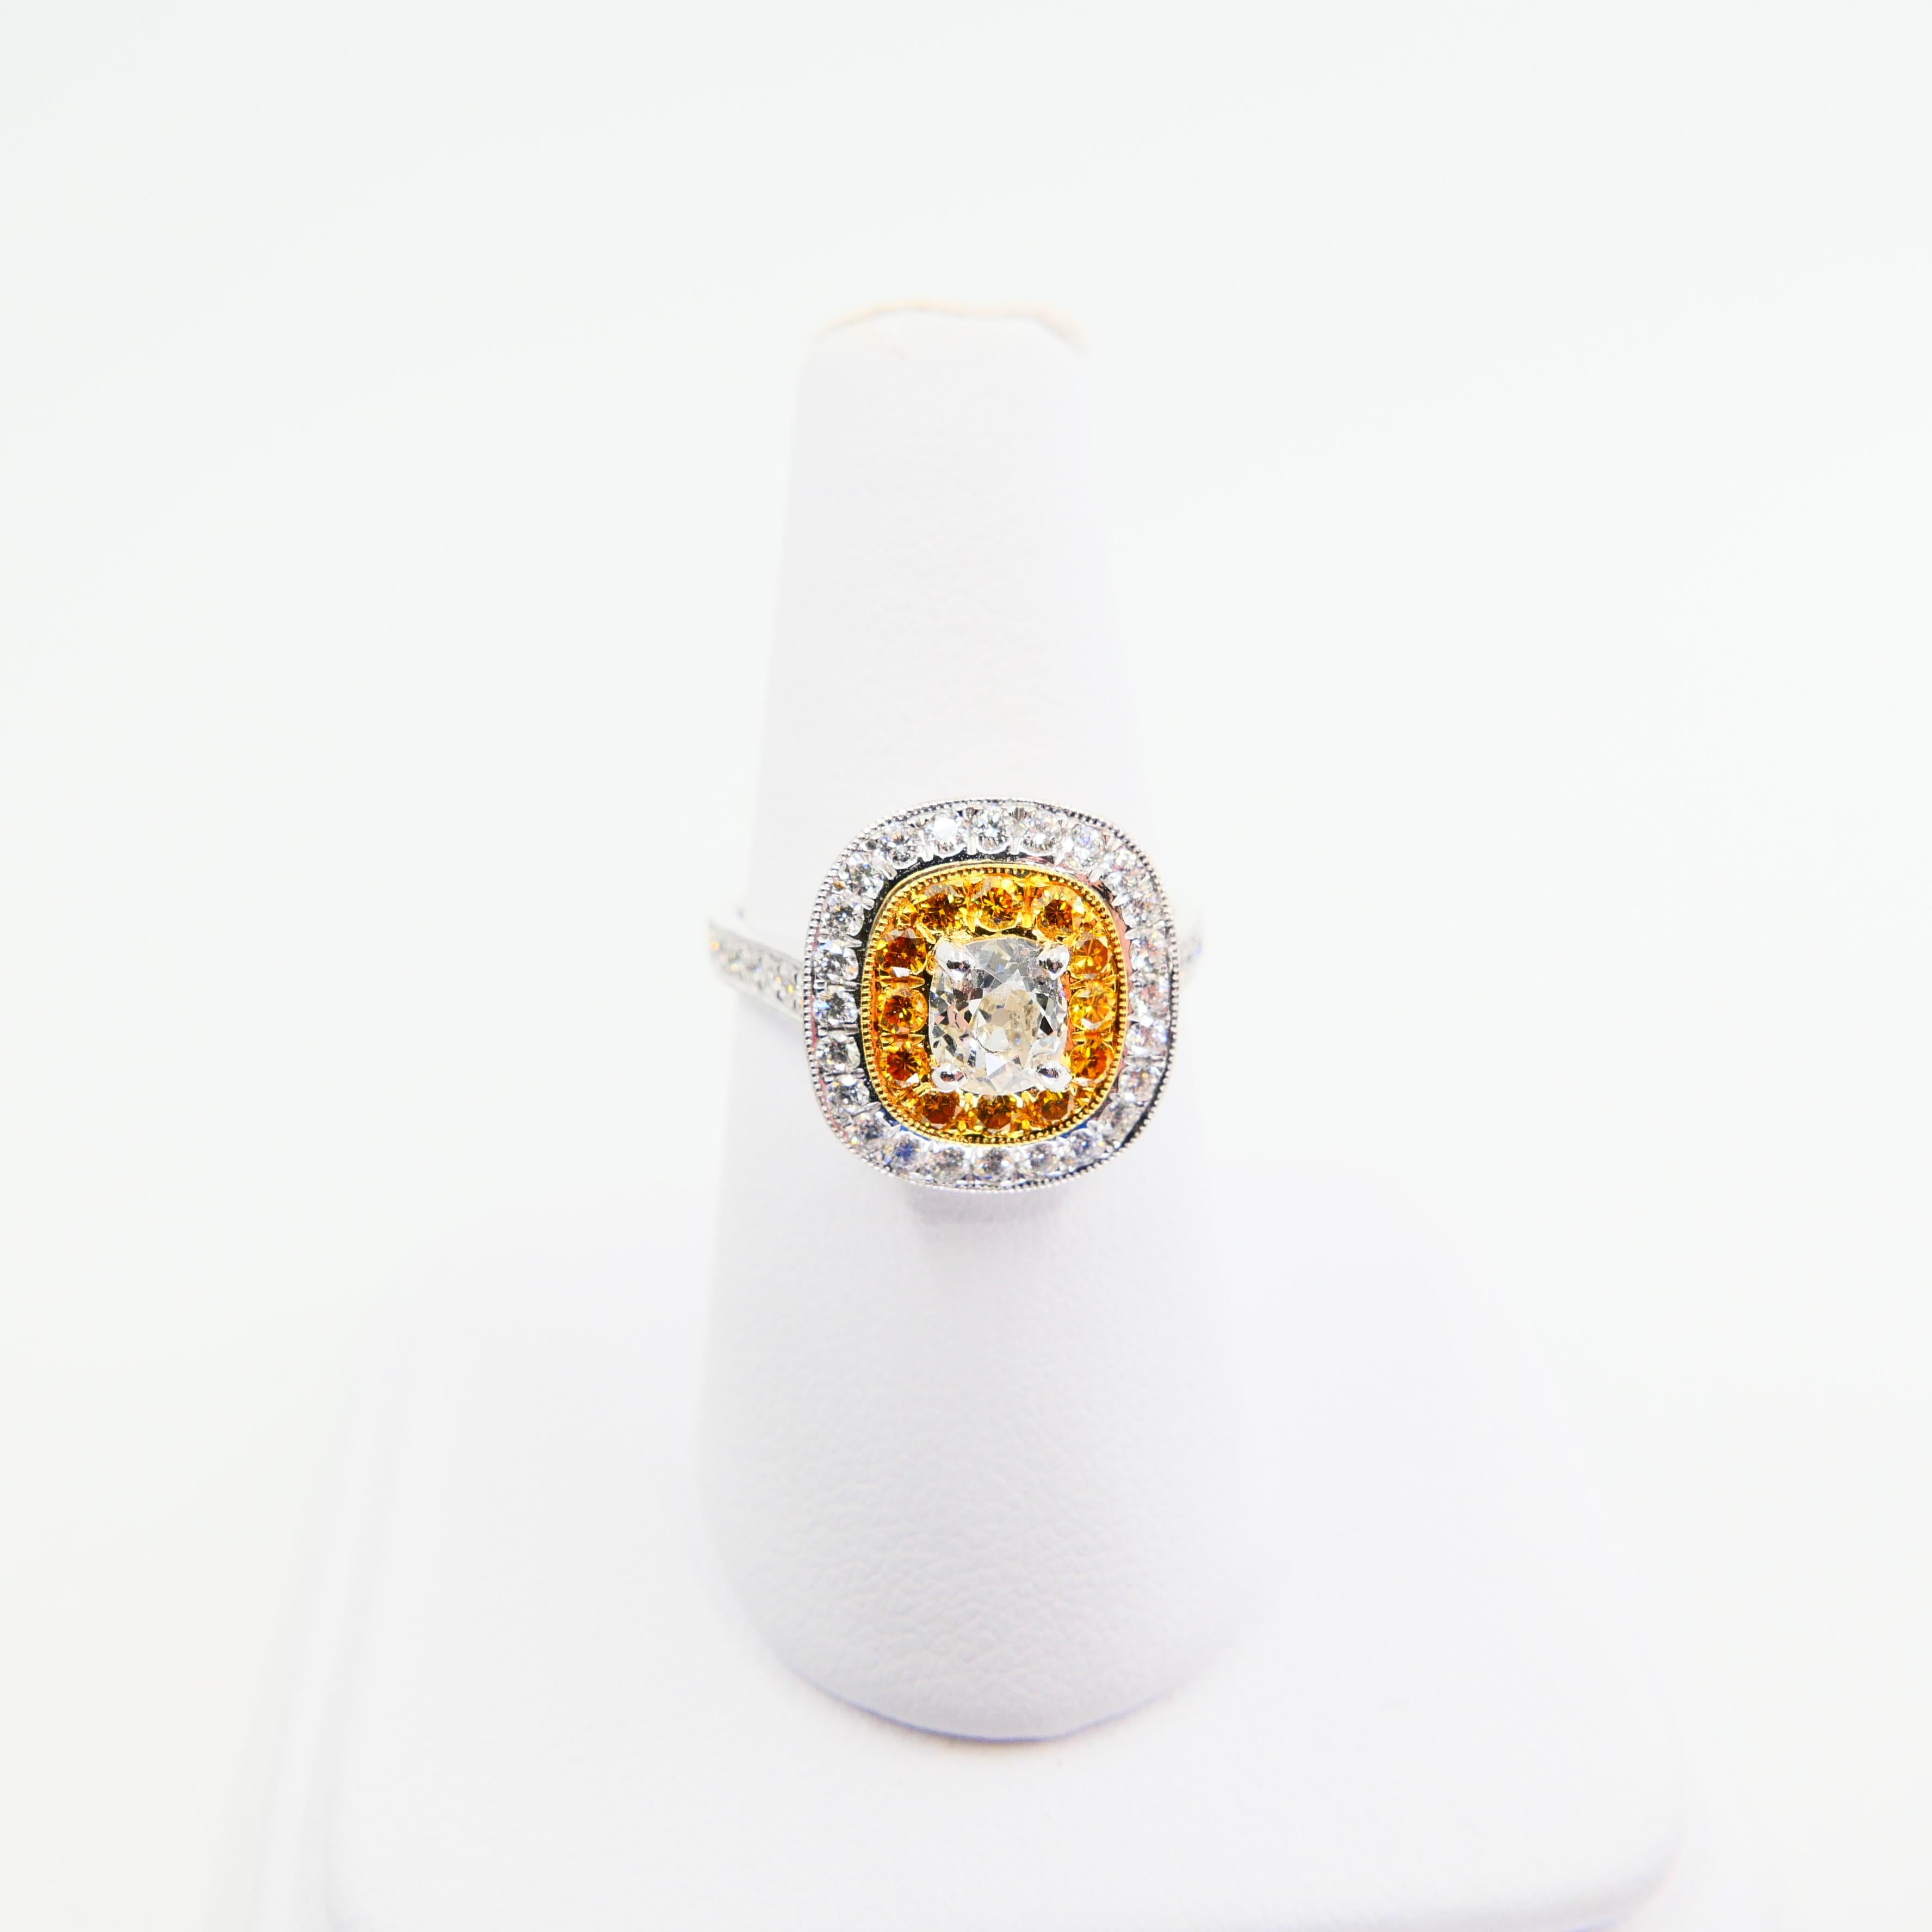 0.54 Cts Old Mine Cut & Fancy Vivid Yellow Diamond Cocktail Ring, 18K White Gold 7